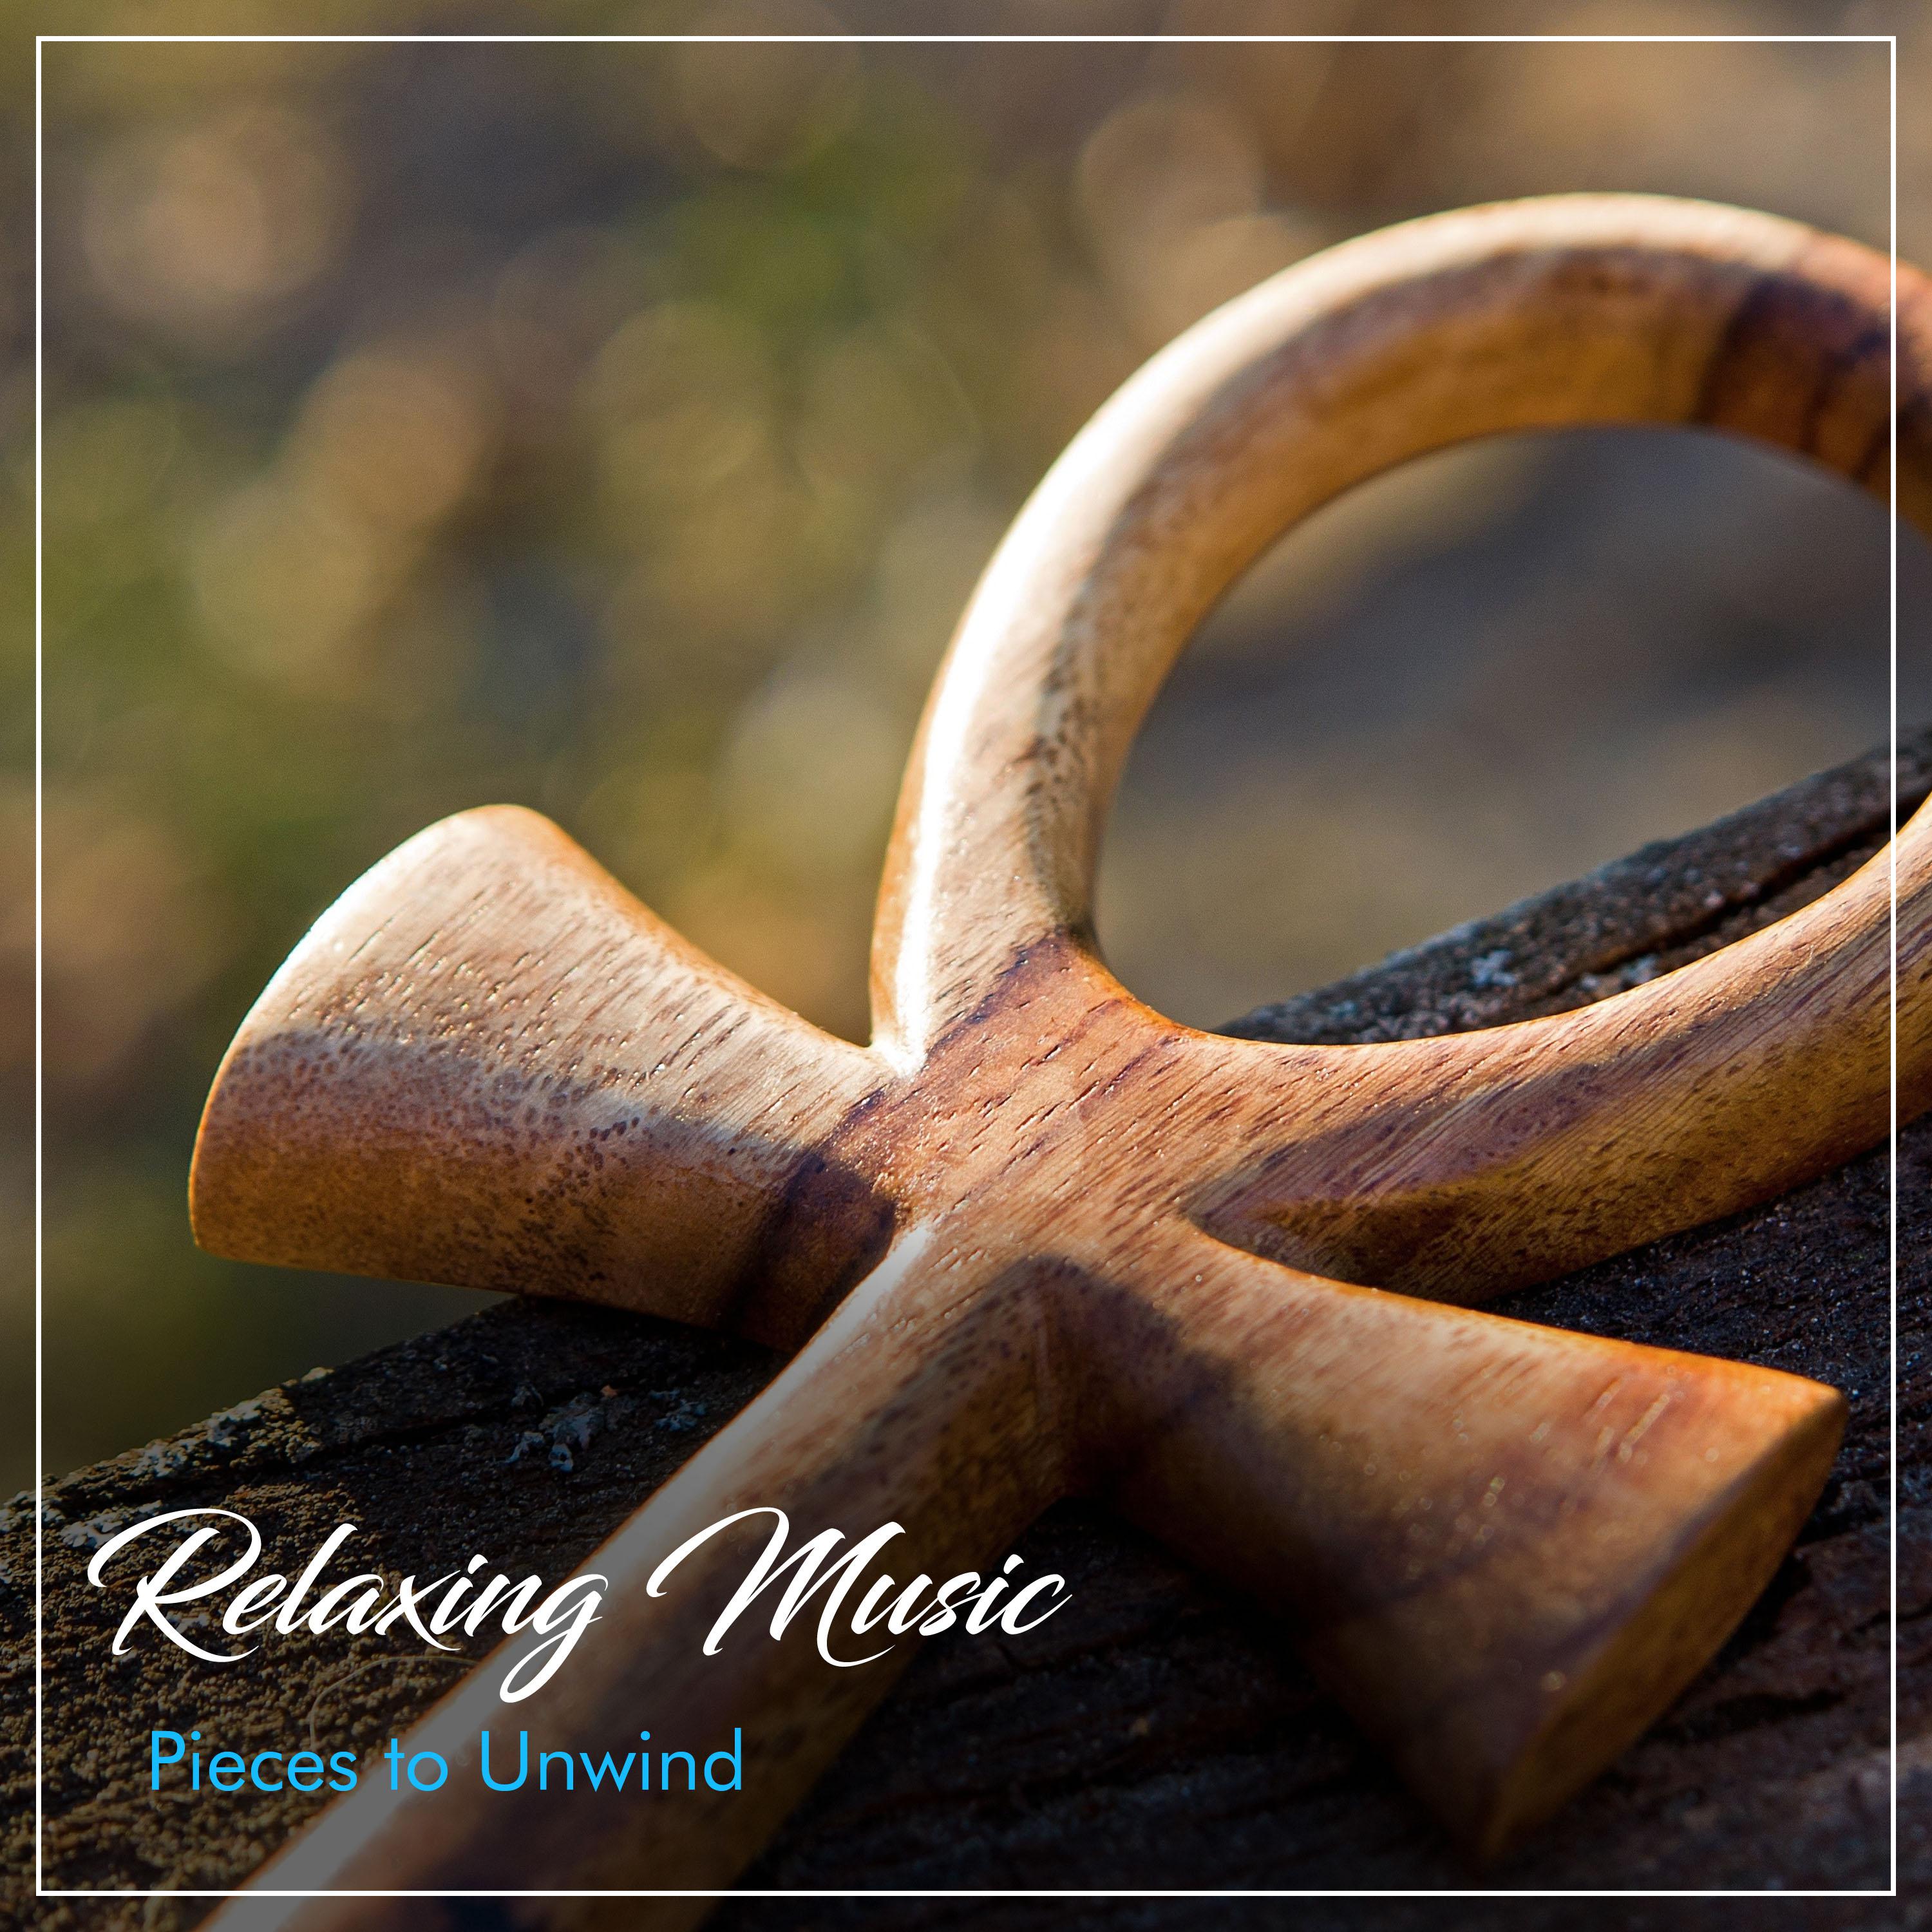 12 Relaxing Music Pieces to Unwind